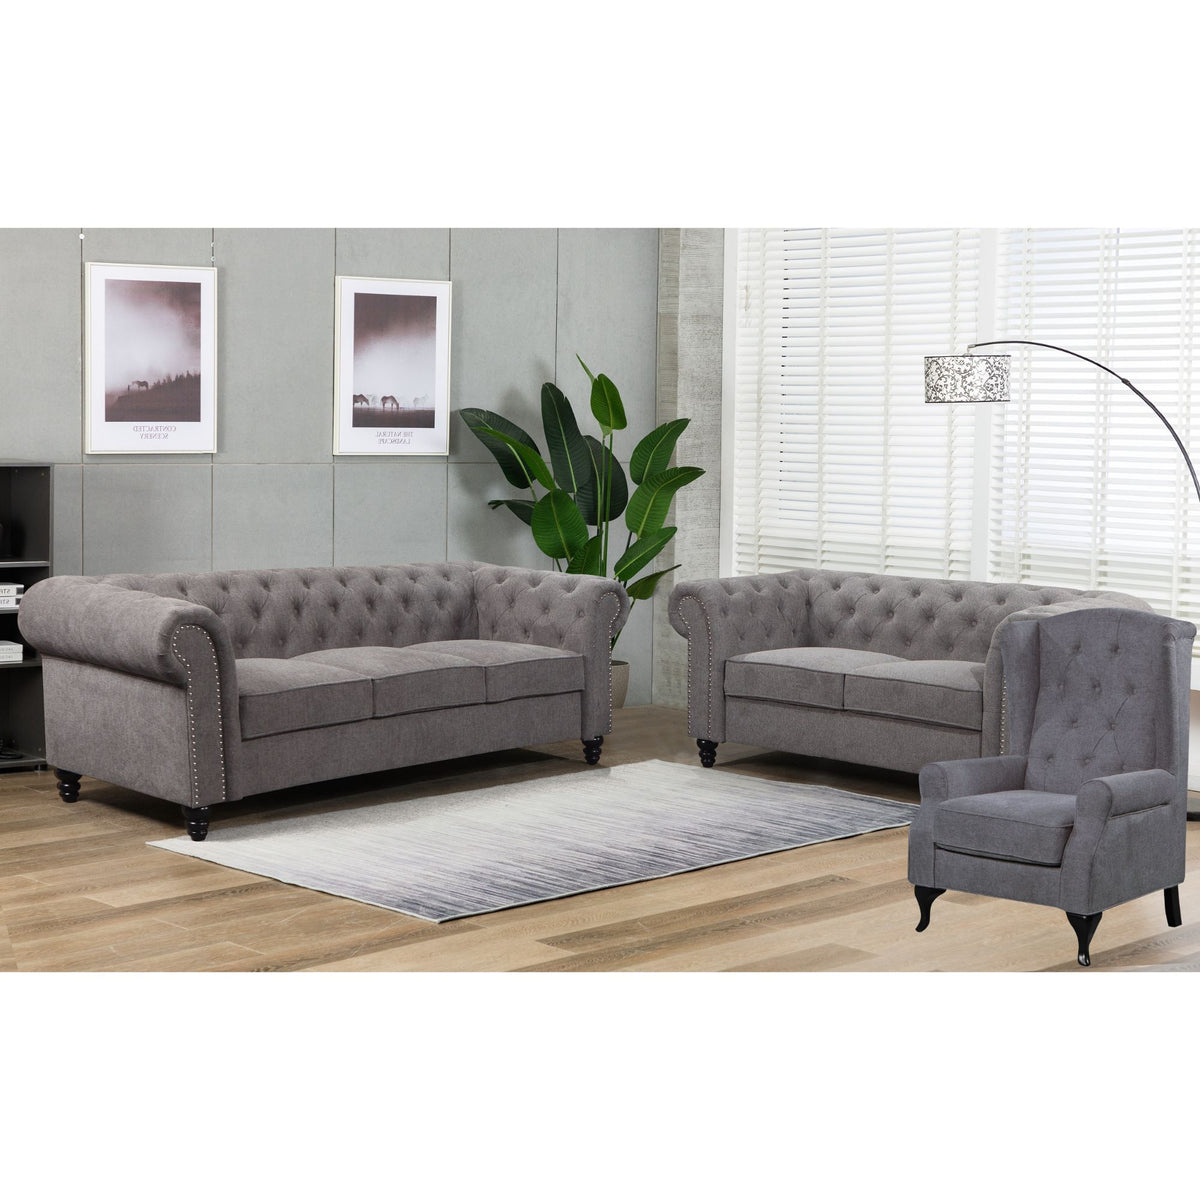 Kiho Chesterfield Wing Back Fabric Sofa Chair in Grey Set - 2 Pieces - Notbrand